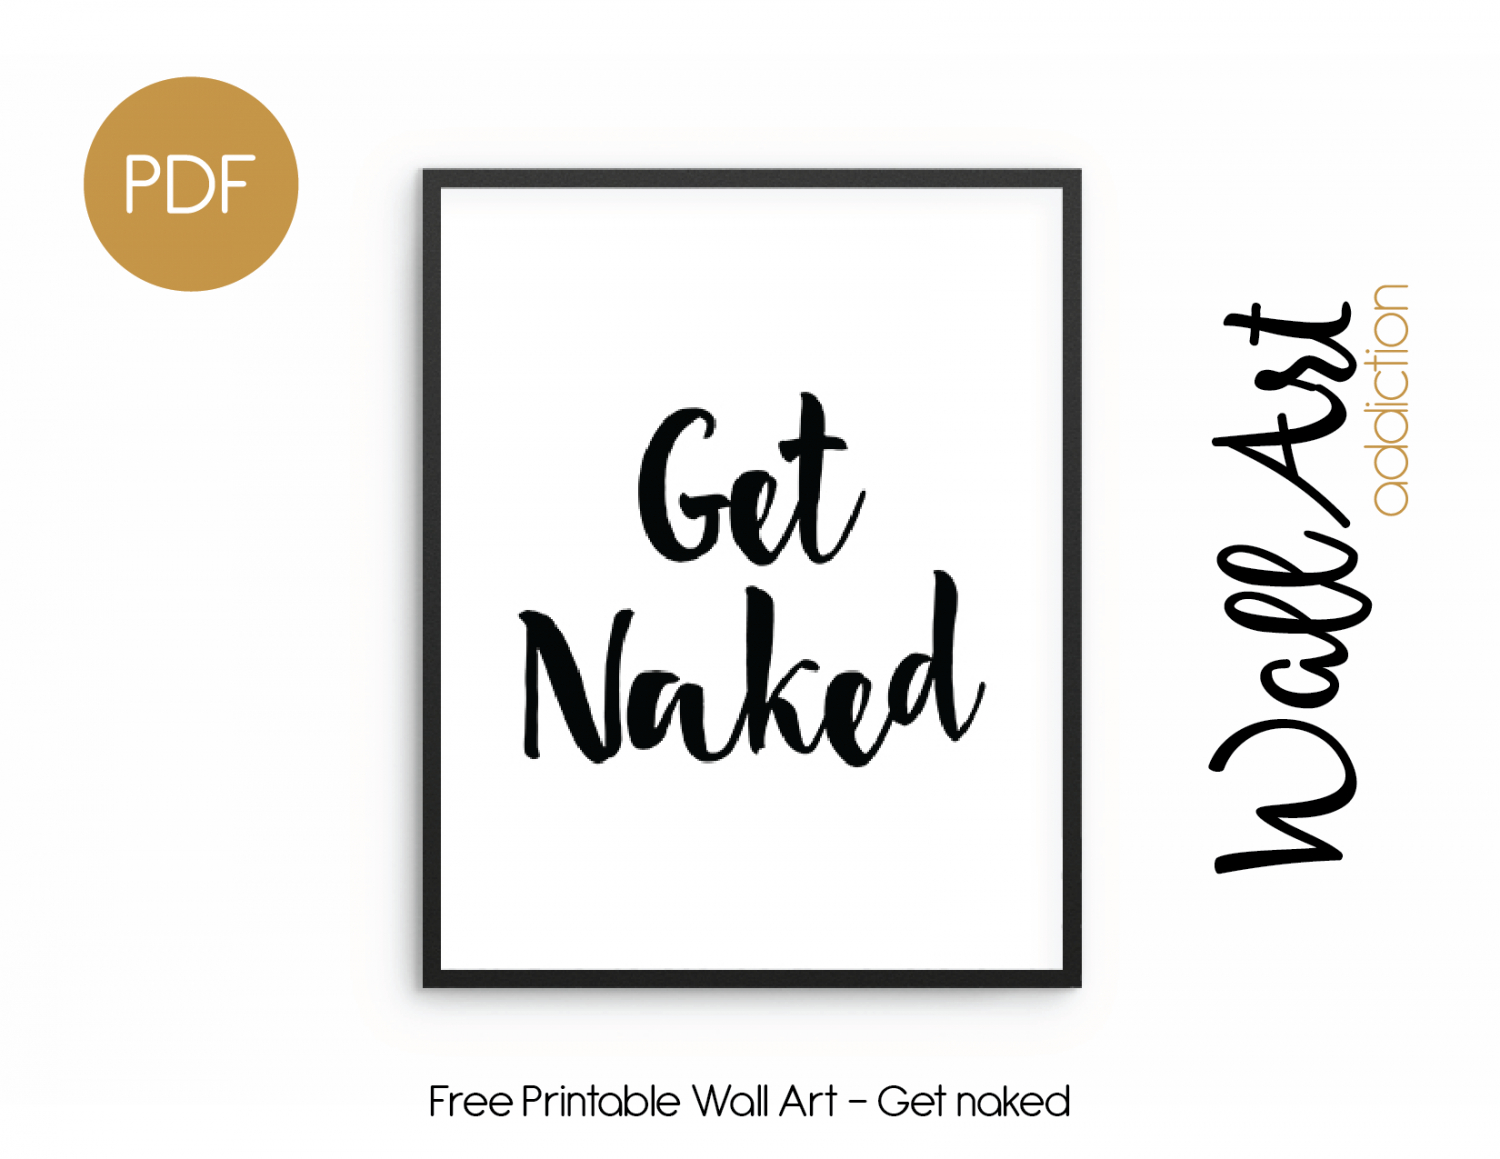 Free Printable Wall Art - Get Naked | Mostly Free Printables - Free Printable Wall Art For Bathroom